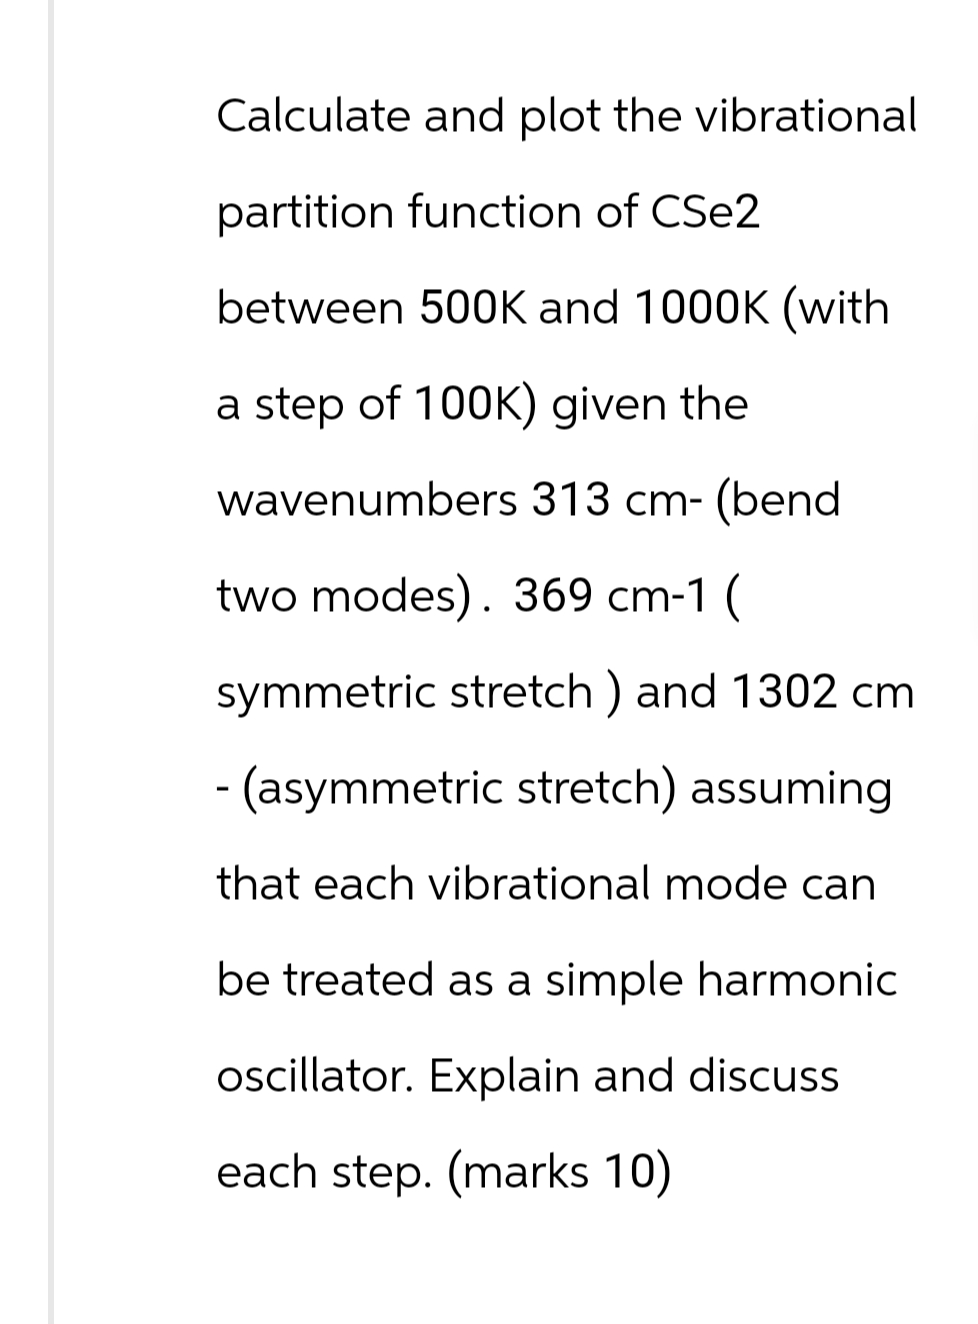 Calculate and plot the vibrational
partition function of CSe2
between 500K and 1000K (with
a step of 100K) given the
wavenumbers 313 cm- (bend.
two modes). 369 cm-1 (
symmetric stretch) and 1302 cm
- (asymmetric stretch) assuming
that each vibrational mode can
be treated as a simple harmonic
oscillator. Explain and discuss
each step. (marks 10)